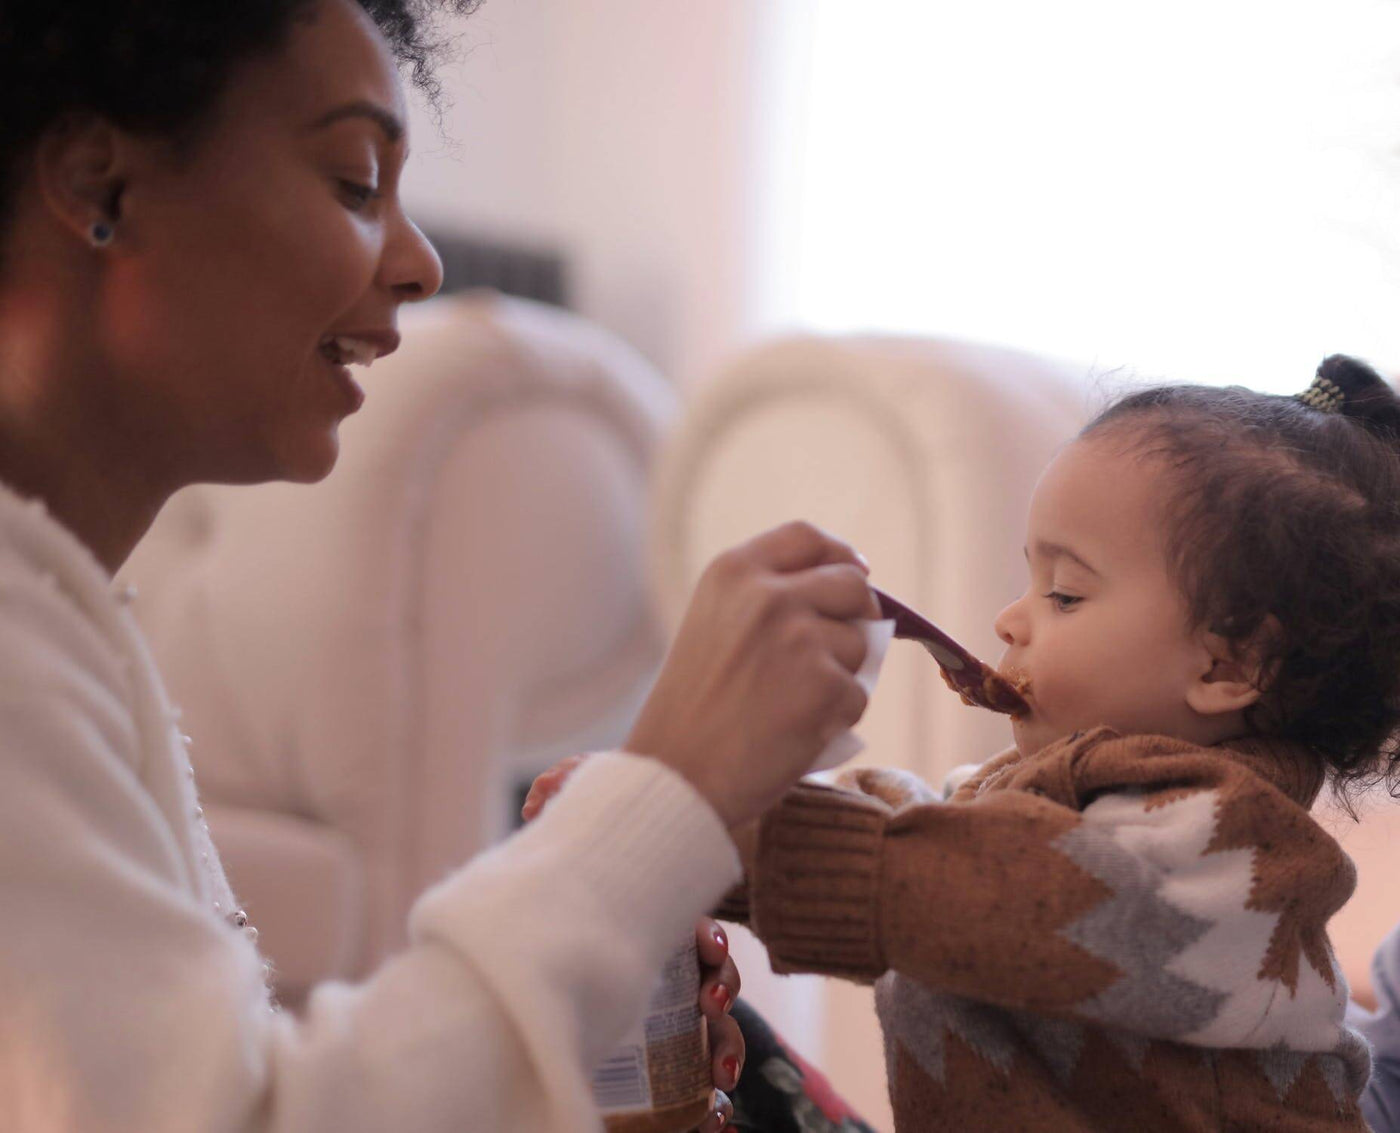 woman feeding baby who’s a picky eater